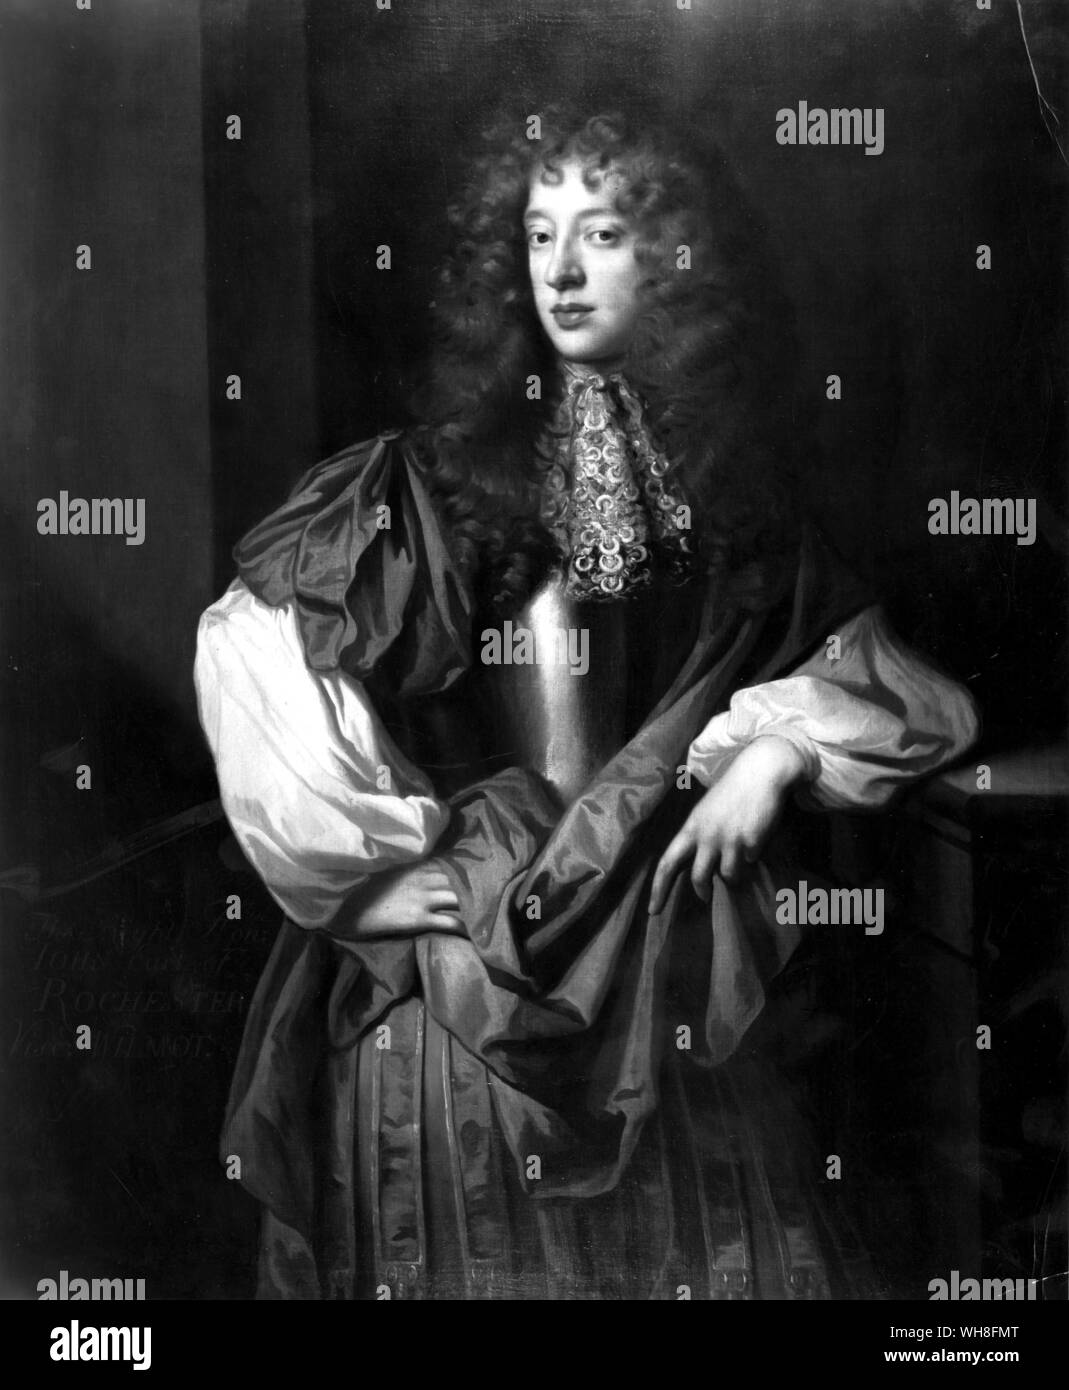 Lord Rochester, John Wilmot, Second Earl of Rochester (1647-1680). English courtier and poet. Portrait by Sir Peter Lely (1666-7). Sir Peter Lely (1618-1680), was a portrait painter and principal painter to Charles II. Lord Rochester's Monkey by Graham Greene, page 37.. . Stock Photo